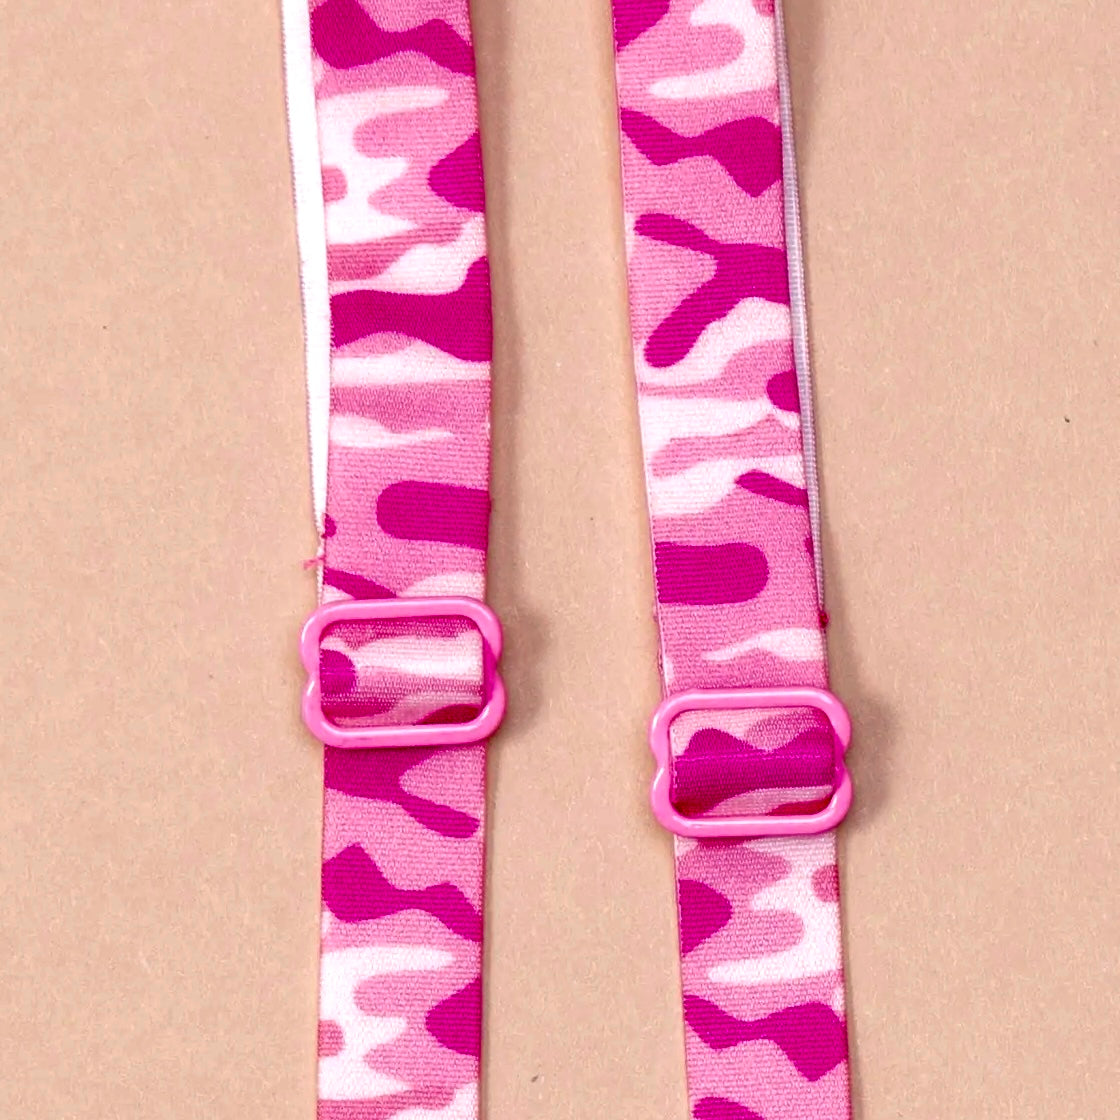 Close up of pink camo bra straps featuring pink coated metal hardware.